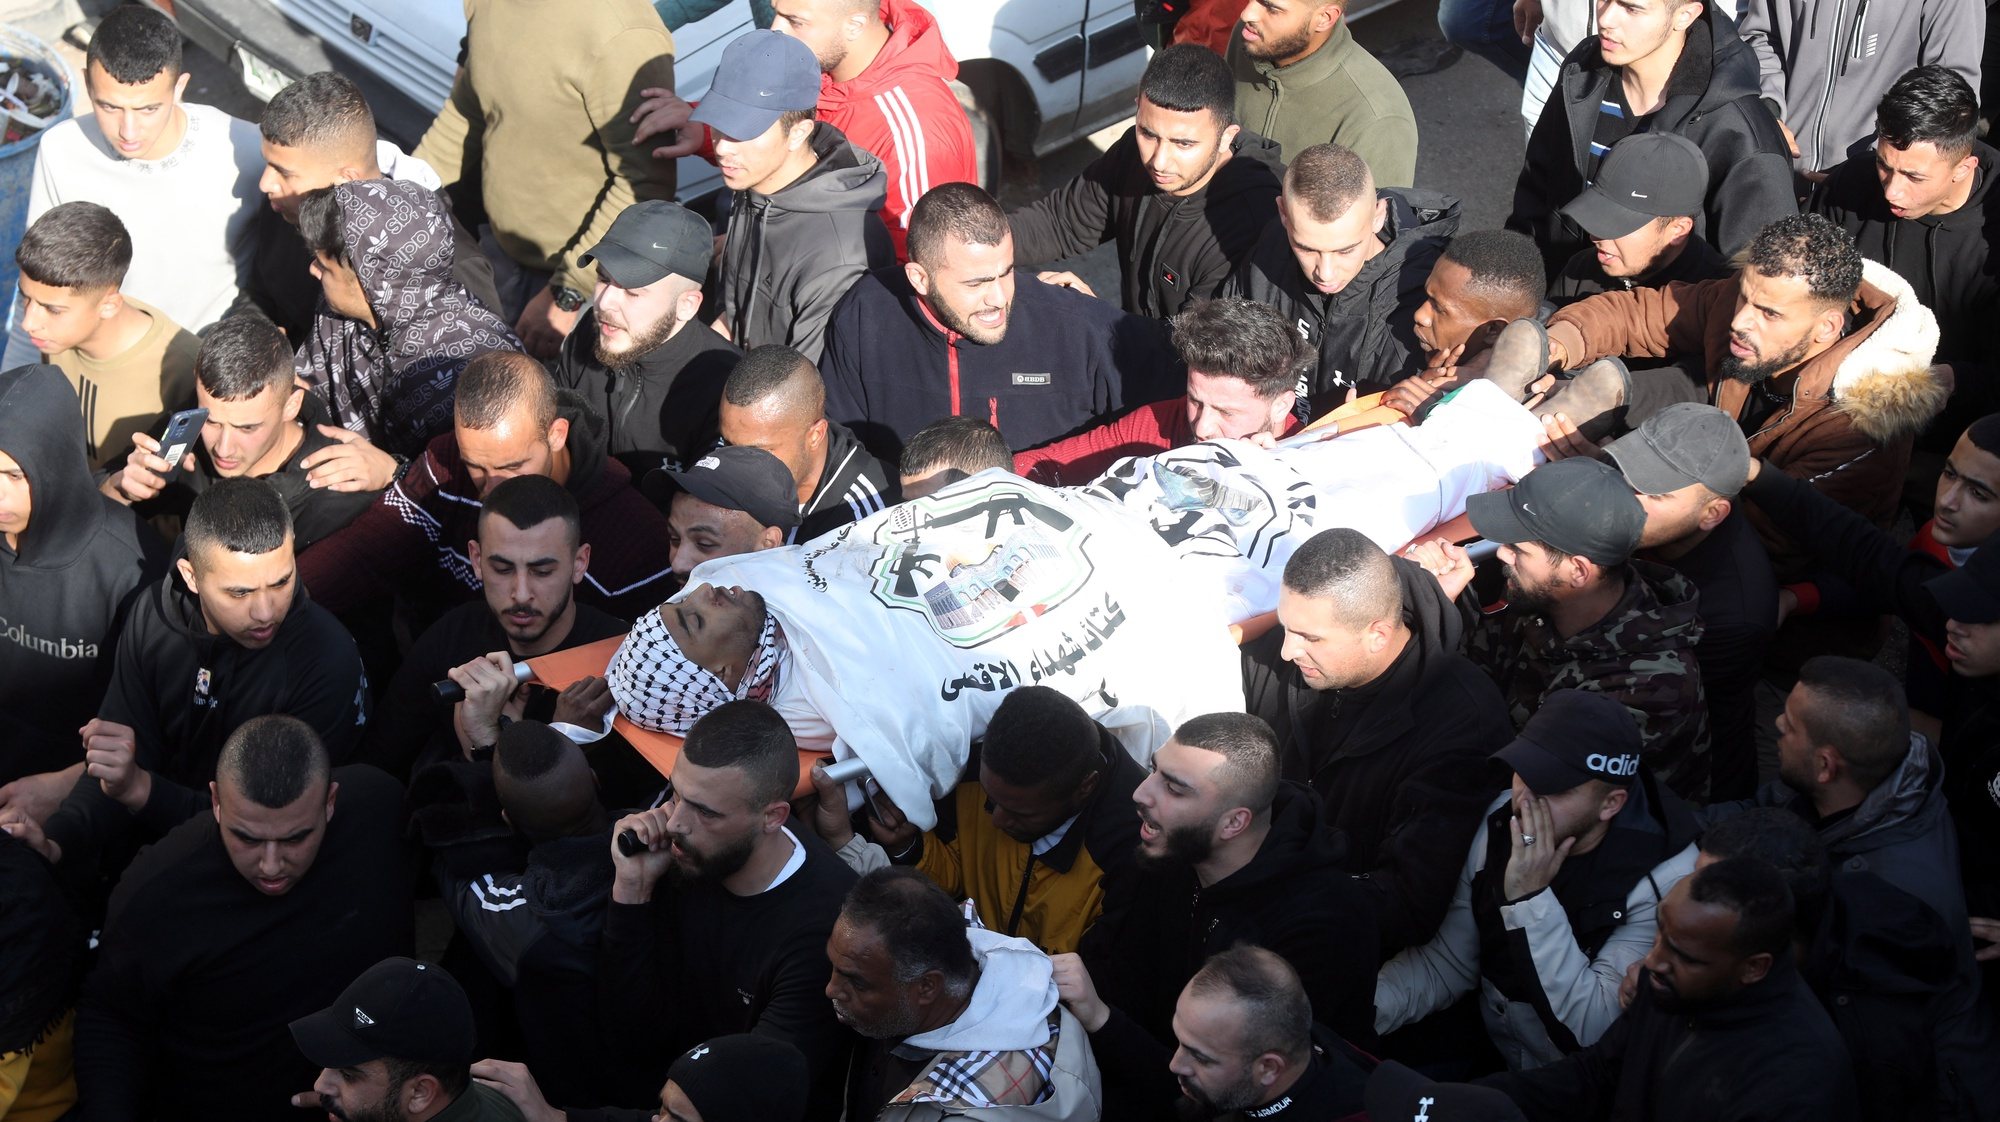 epa10431327 Mourners carry a body of one of nine Palestinians killed during clashes with Israeli troops in Jenin, West Bank, 26 January 2023. At least nine Palestinians were killed, including an elderly woman, during clashes in Jenin on 26 January, according to the Palestinian Health Ministry. Israeli security forces said they conducted a &#039;counterterrorism operation&#039; in the center of Jenin.  EPA/ALAA BADARNEH